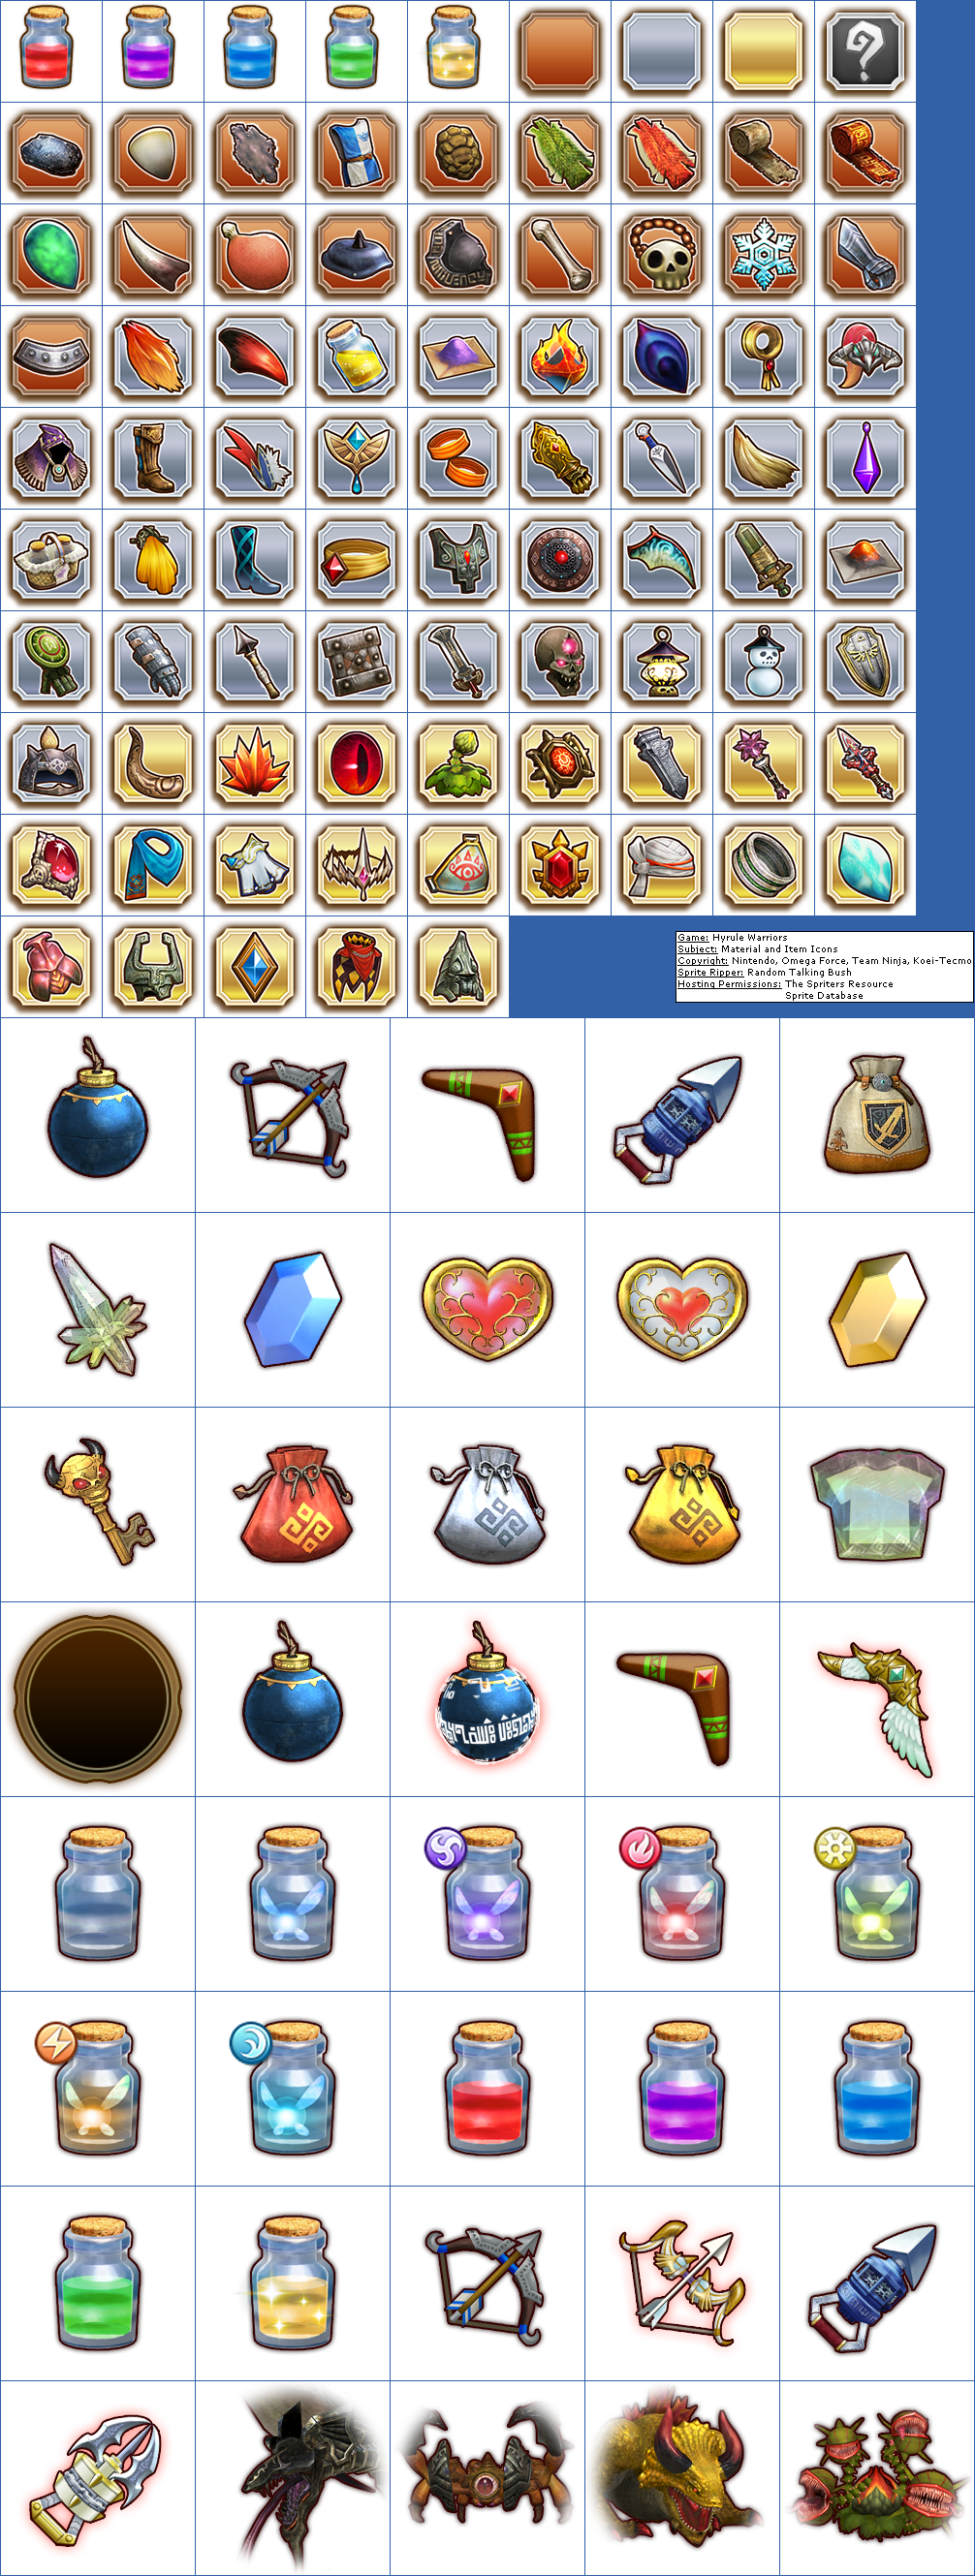 Hyrule Warriors - Material and Item Icons